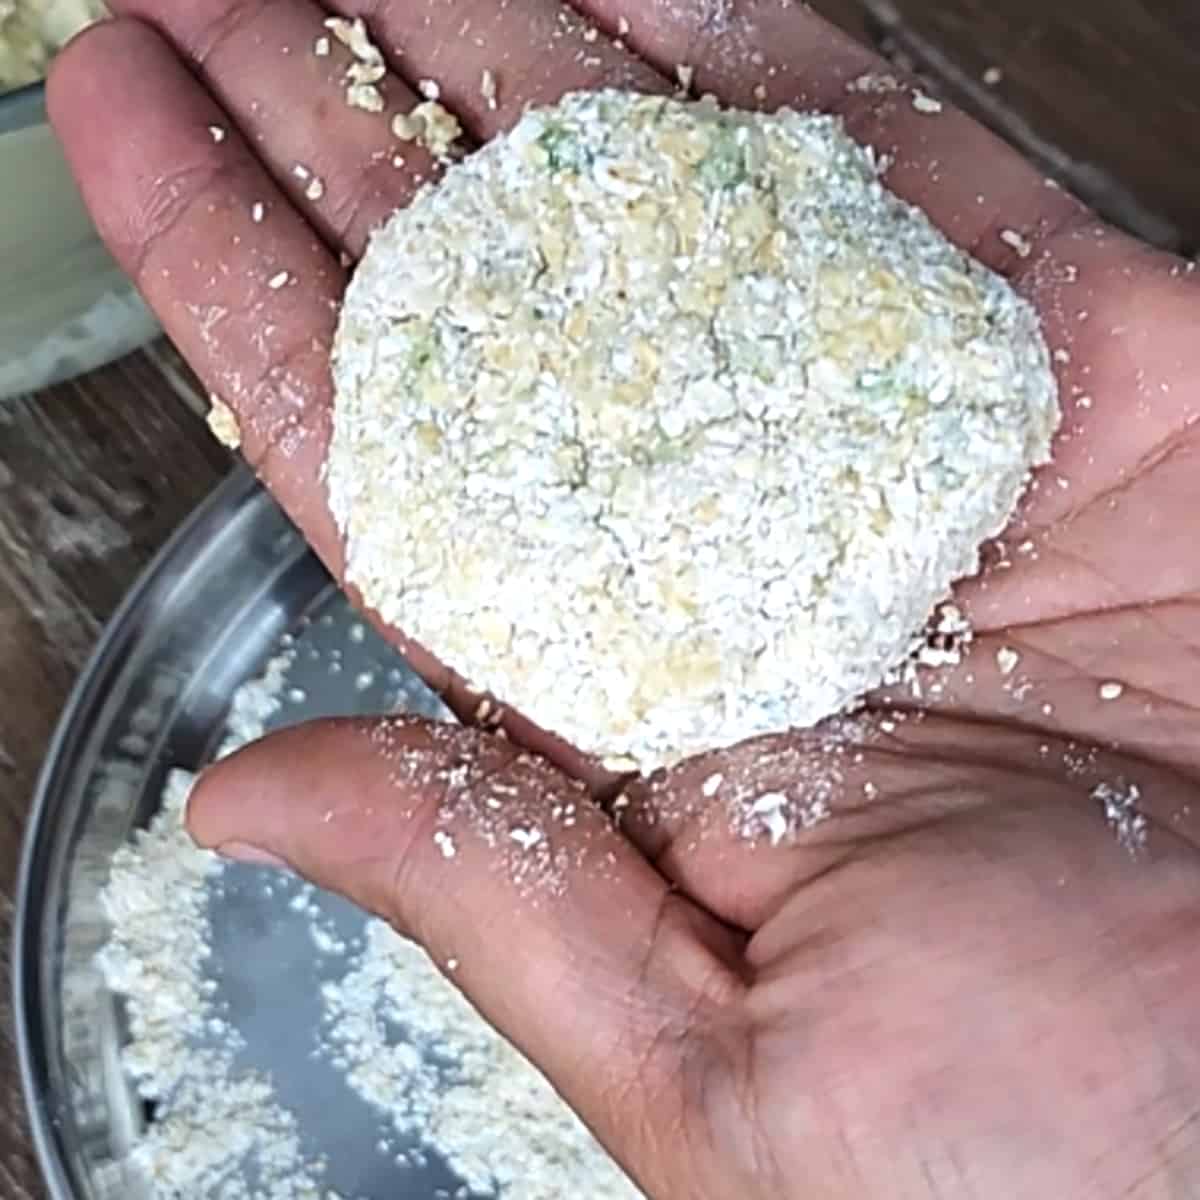 Shape and roll the patty or cutlet in bread crumbs. 